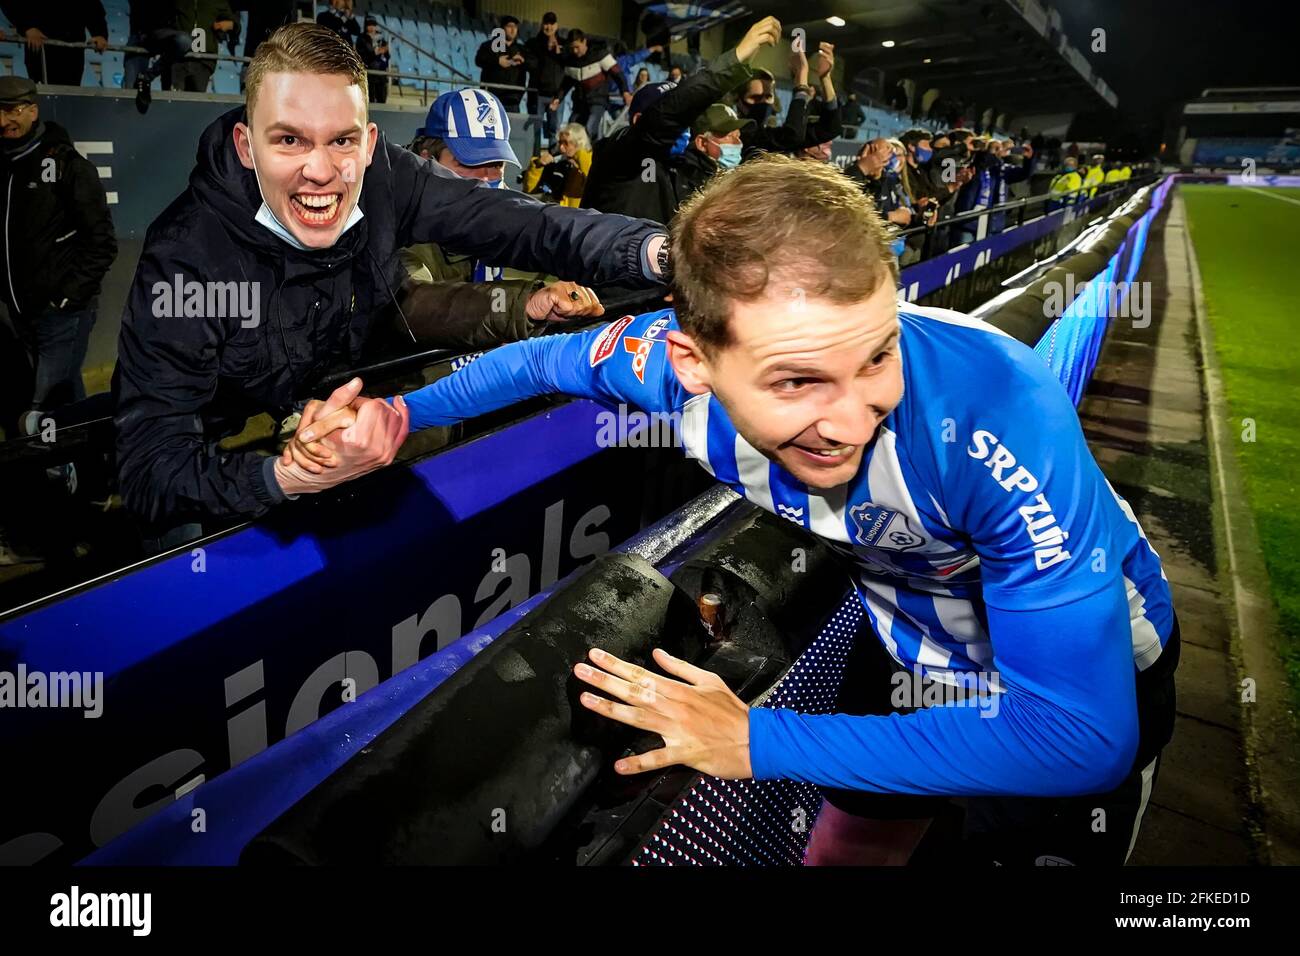 EINDHOVEN, NETHERLANDS - APRIL 30: Supporters of FC Eindhoven celebrating the victory with Joey Sleegers of FC Eindhoven during the Keuken kampioen di Stock Photo